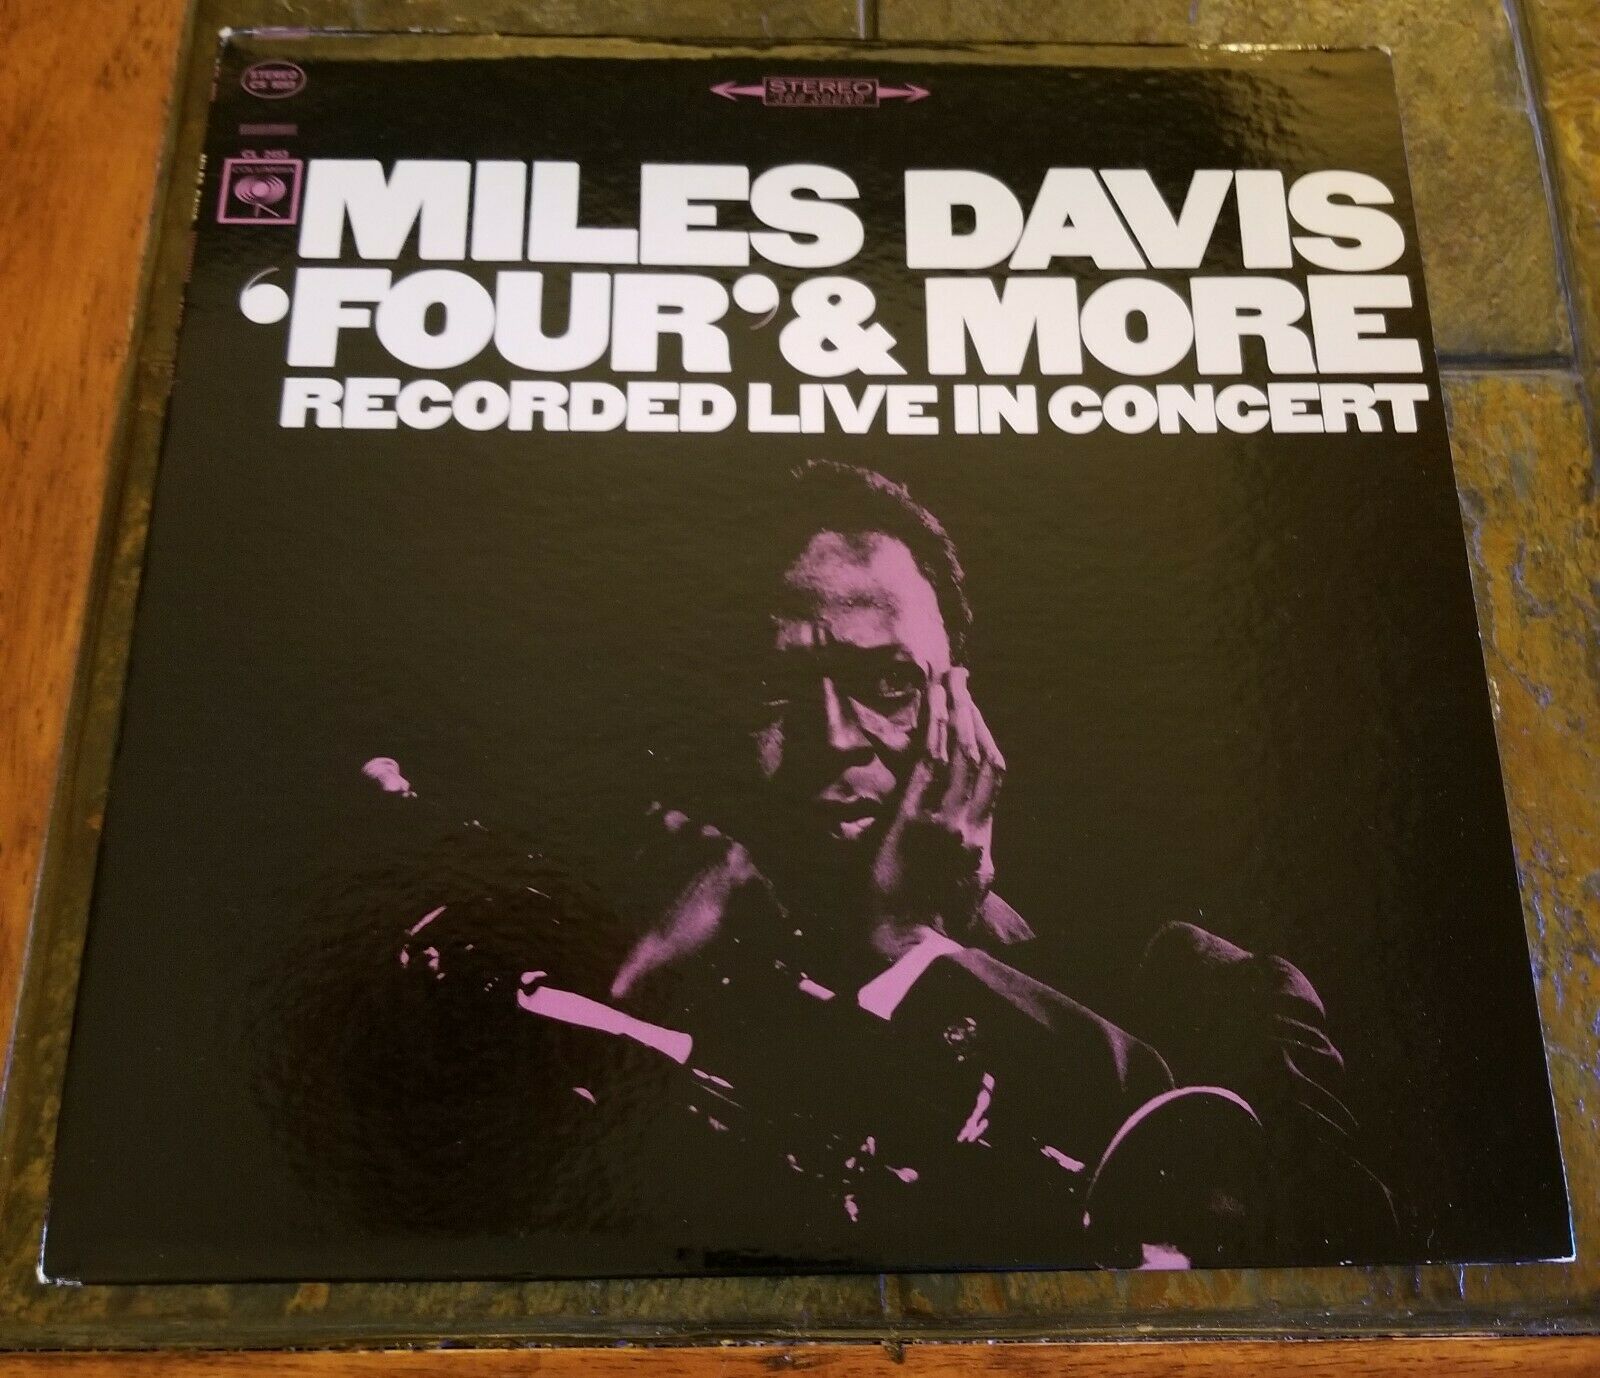 Miles Davis - 'Four' & More - Recorded Live In Concert - Columbia - AUTOGRAPHED